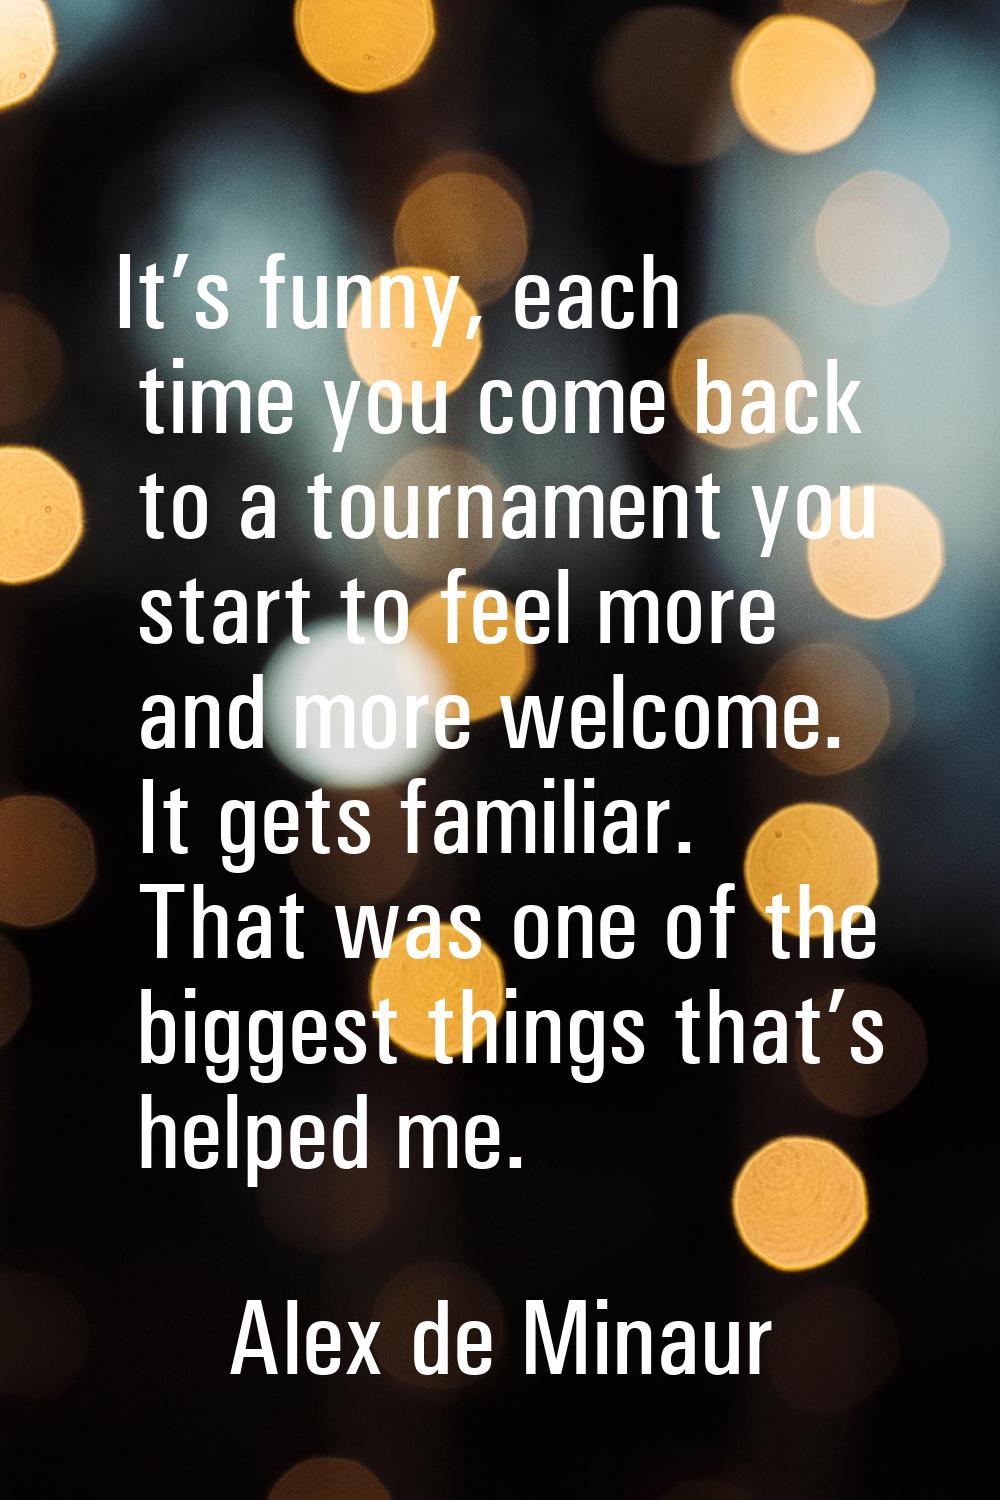 It’s funny, each time you come back to a tournament you start to feel more and more welcome. It get